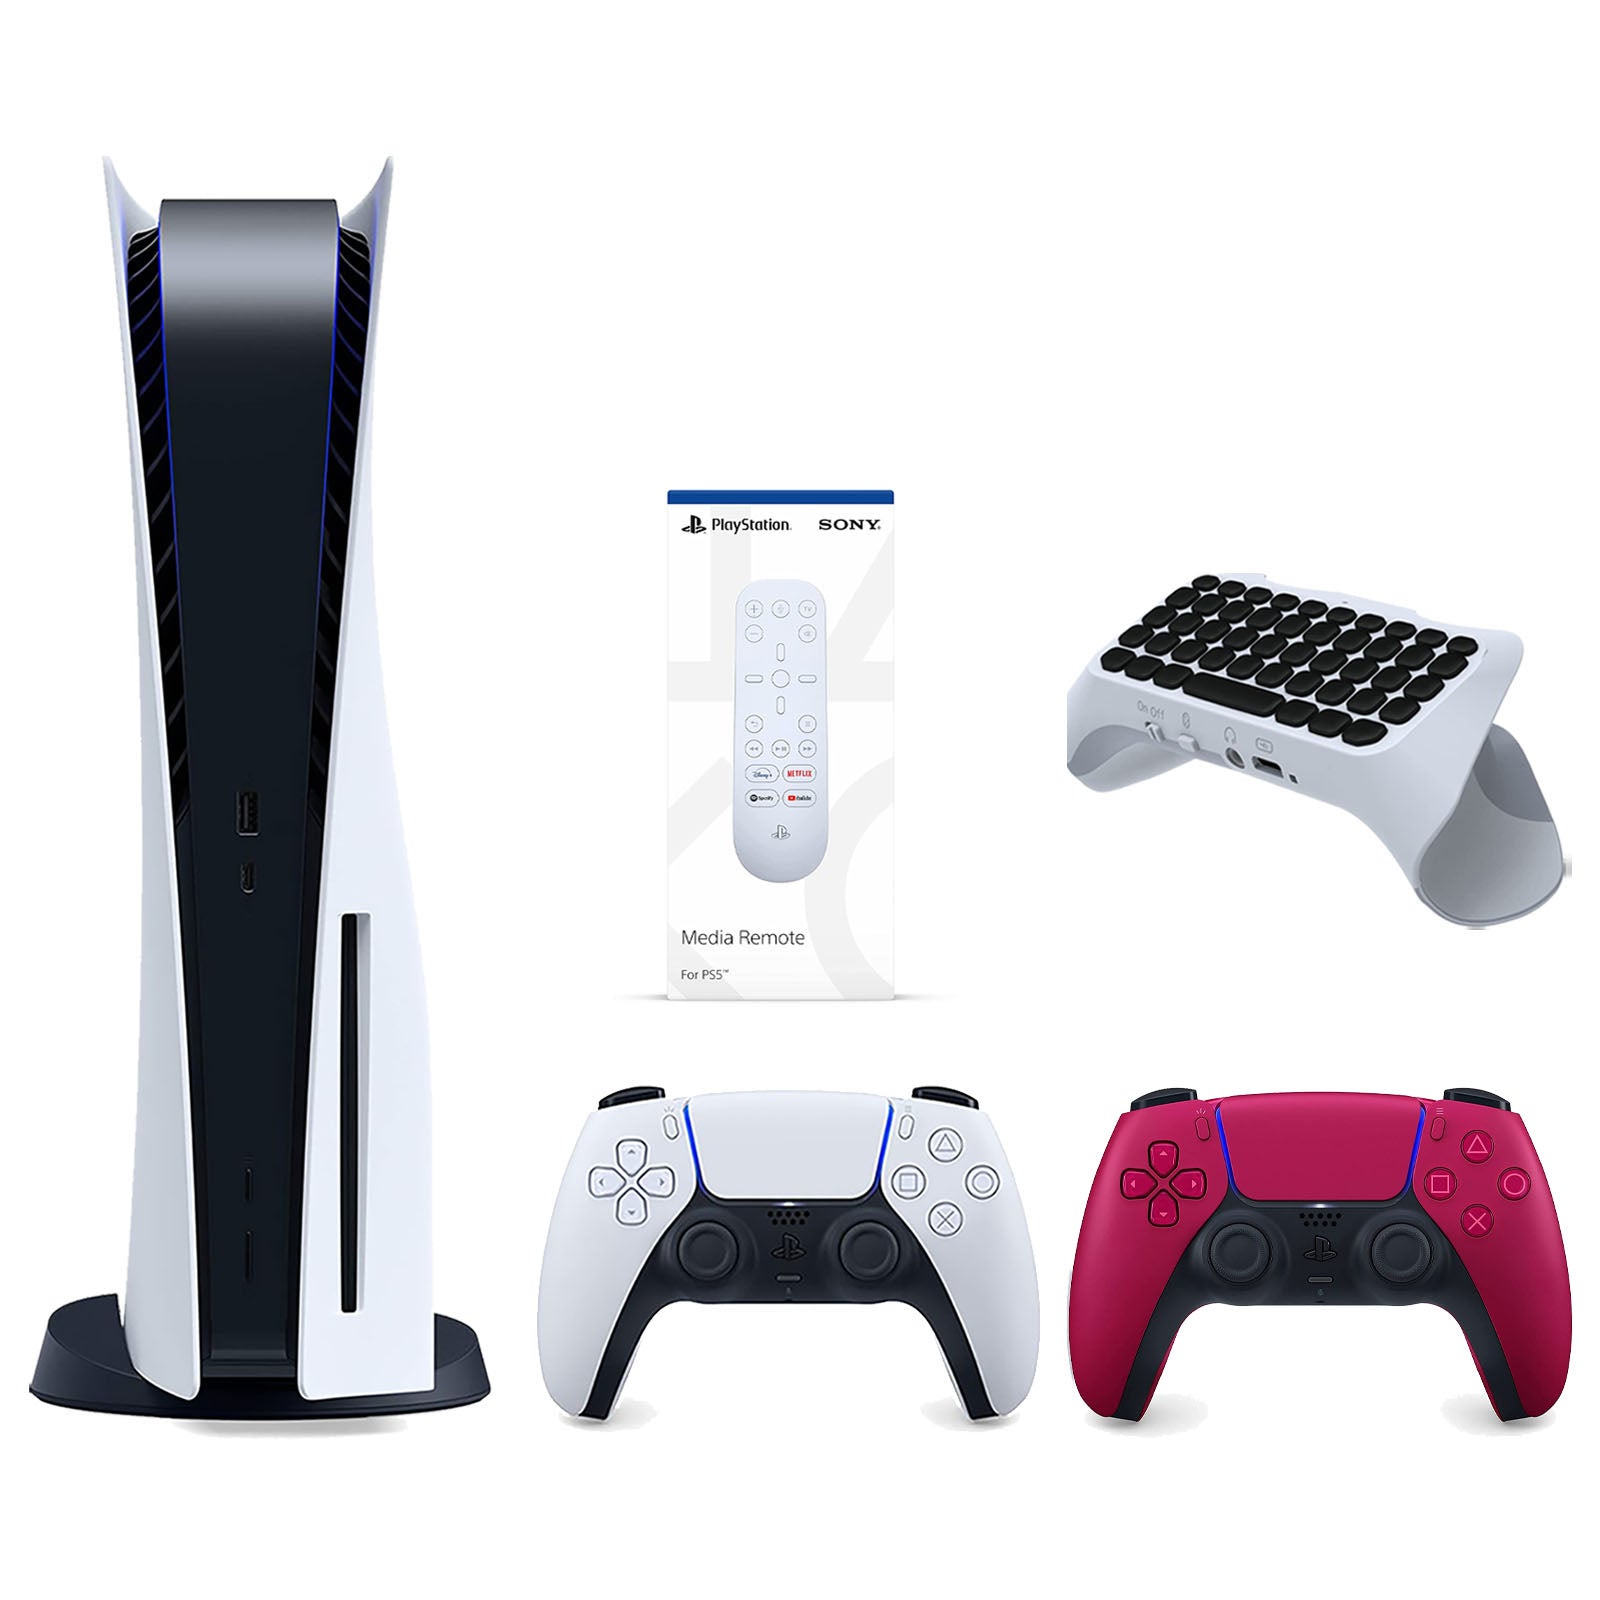 Sony Playstation 5 Disc Version Console with Extra Red Controller, Media Remote and Surge QuickType 2.0 Wireless PS5 Controller Keypad Bundle - Pro-Distributing